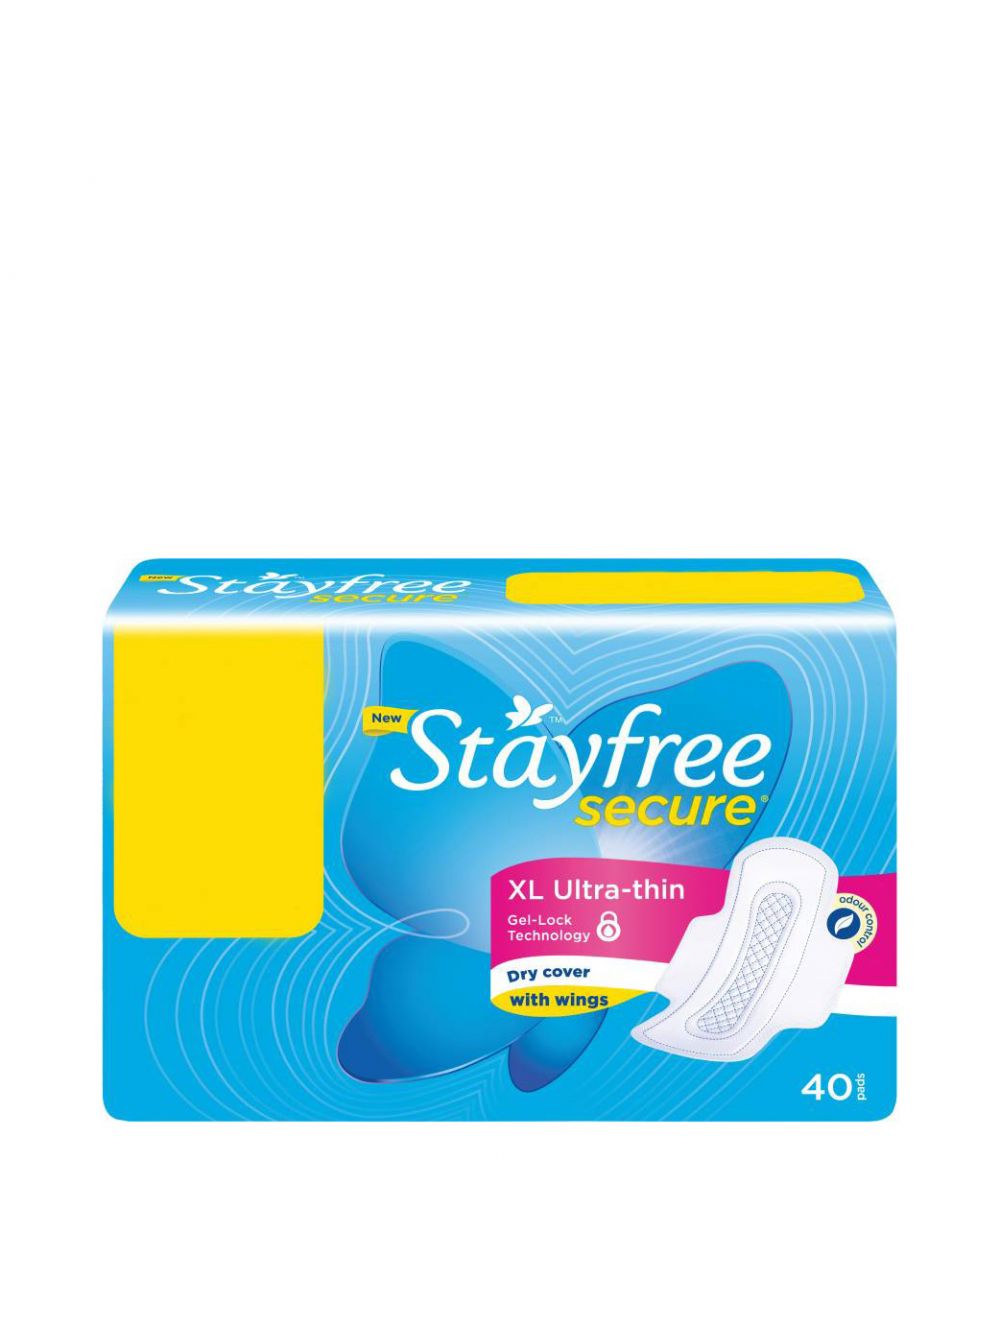 Buy Stayfree Secure XL Ultra Thin Sanitary Napkins with Wings